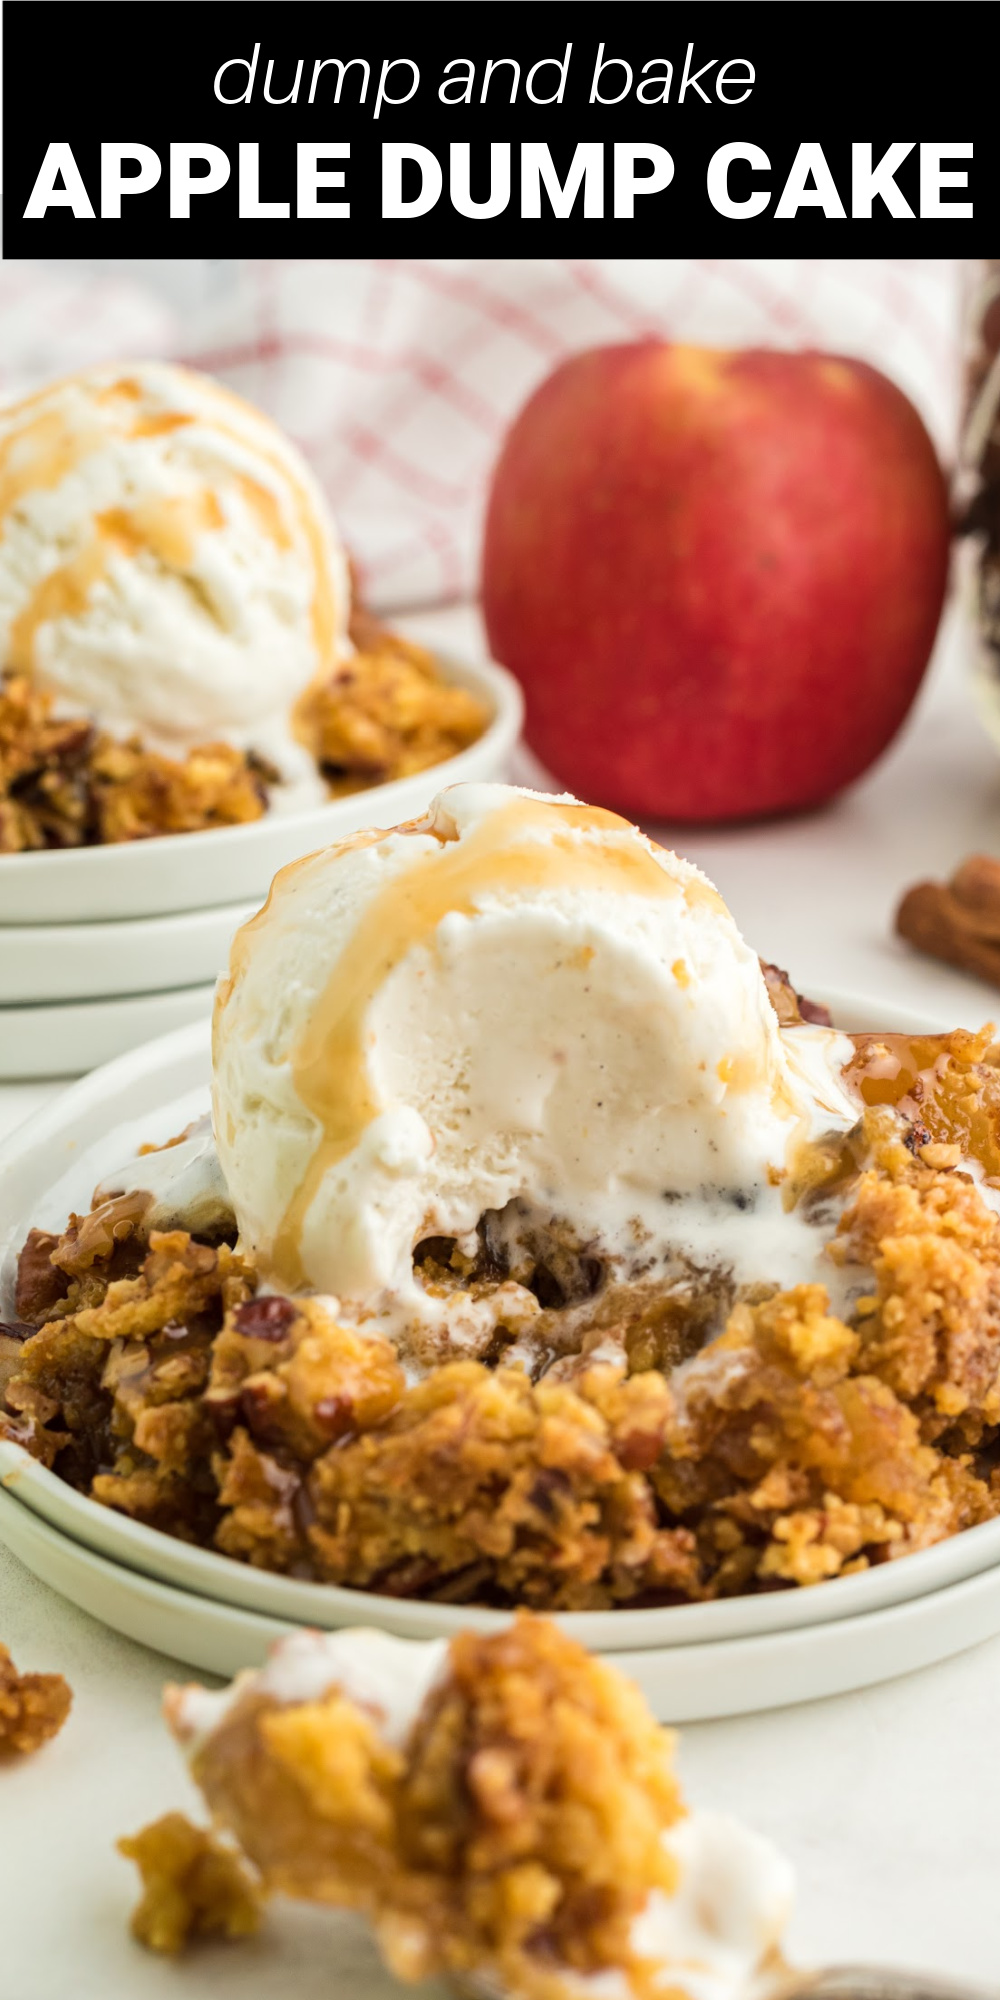 Apple Dump Cake is an easy apple dessert made with simple ingredients. Filled with warming spiced fall flavors it's perfect for the holidays!